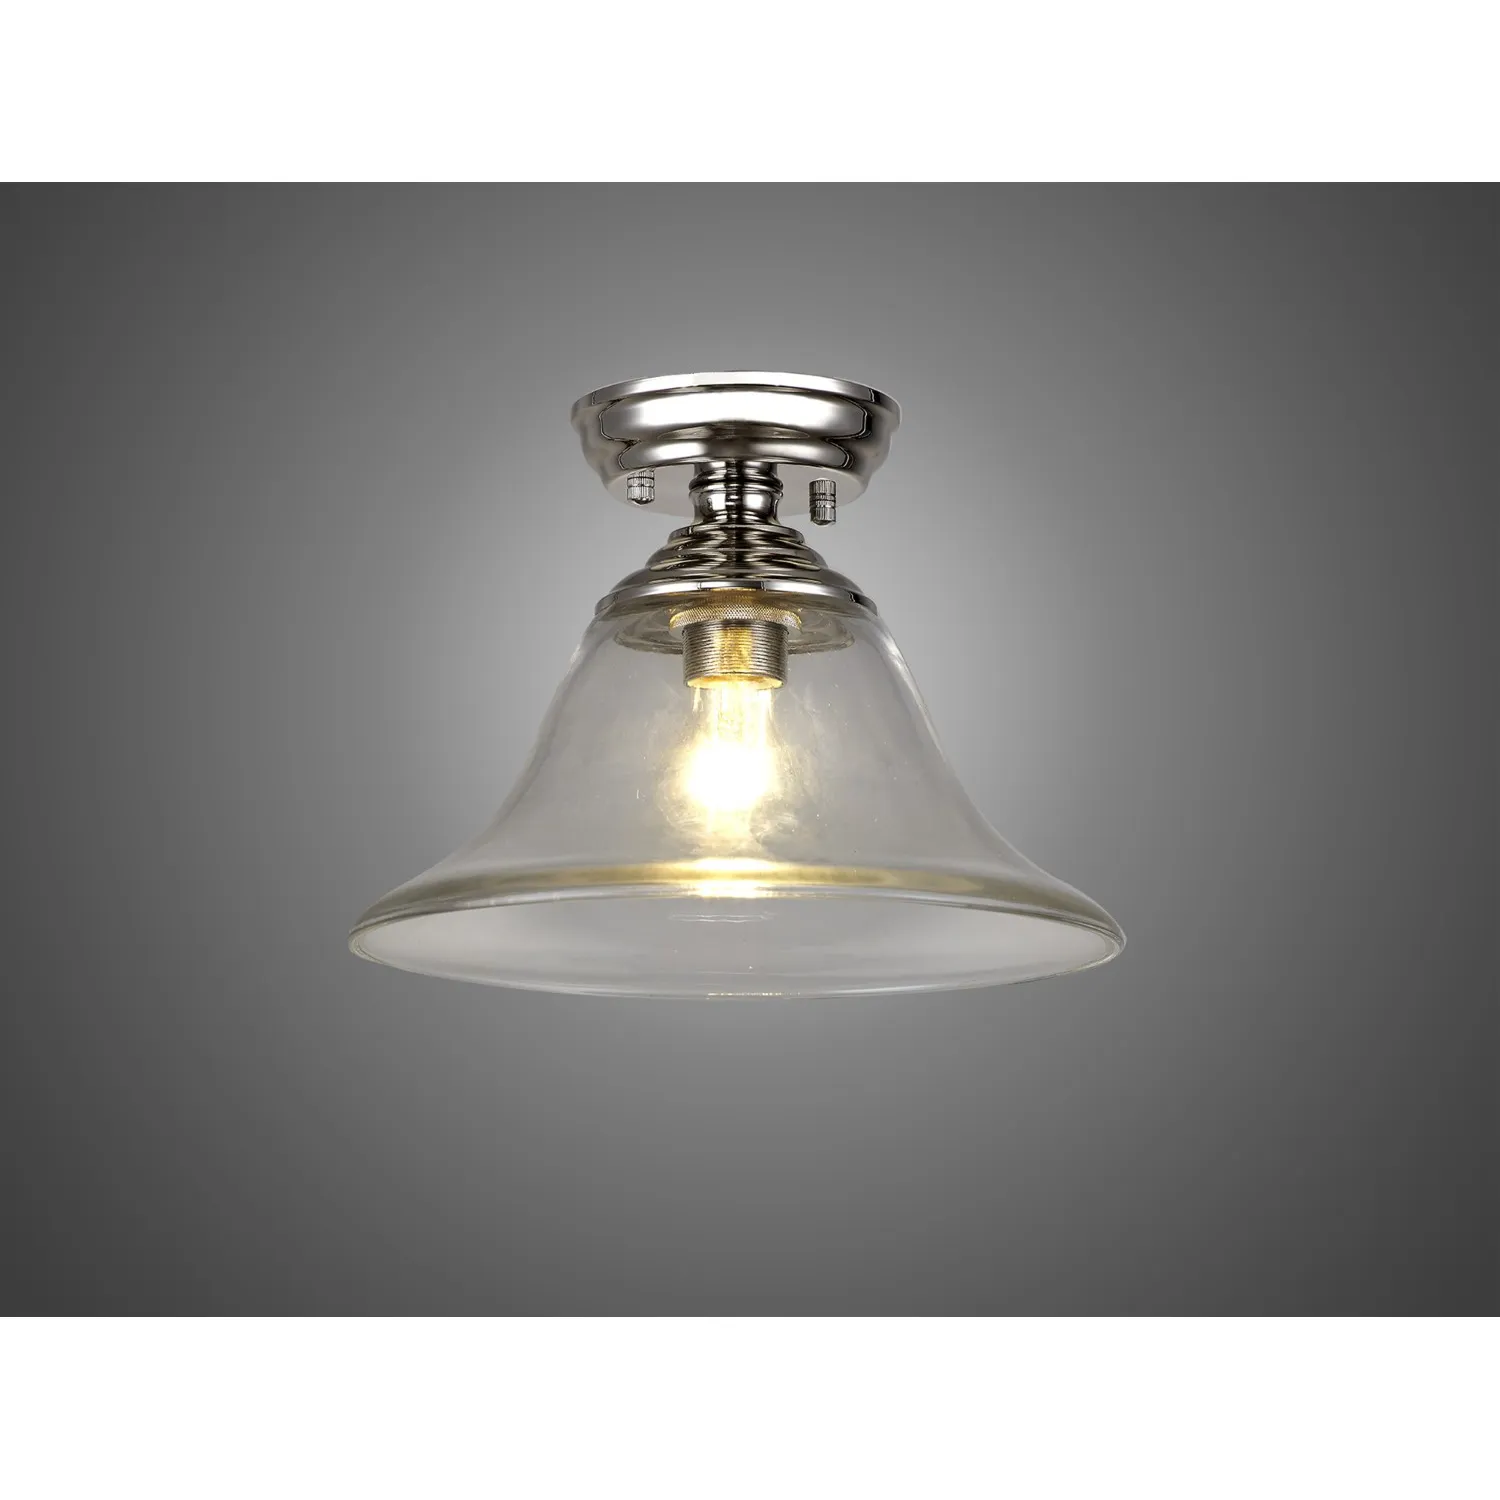 Billericay 1 Light Flush Ceiling E27 With Smooth Bell 30cm Glass Shade Polished Nickel Clear